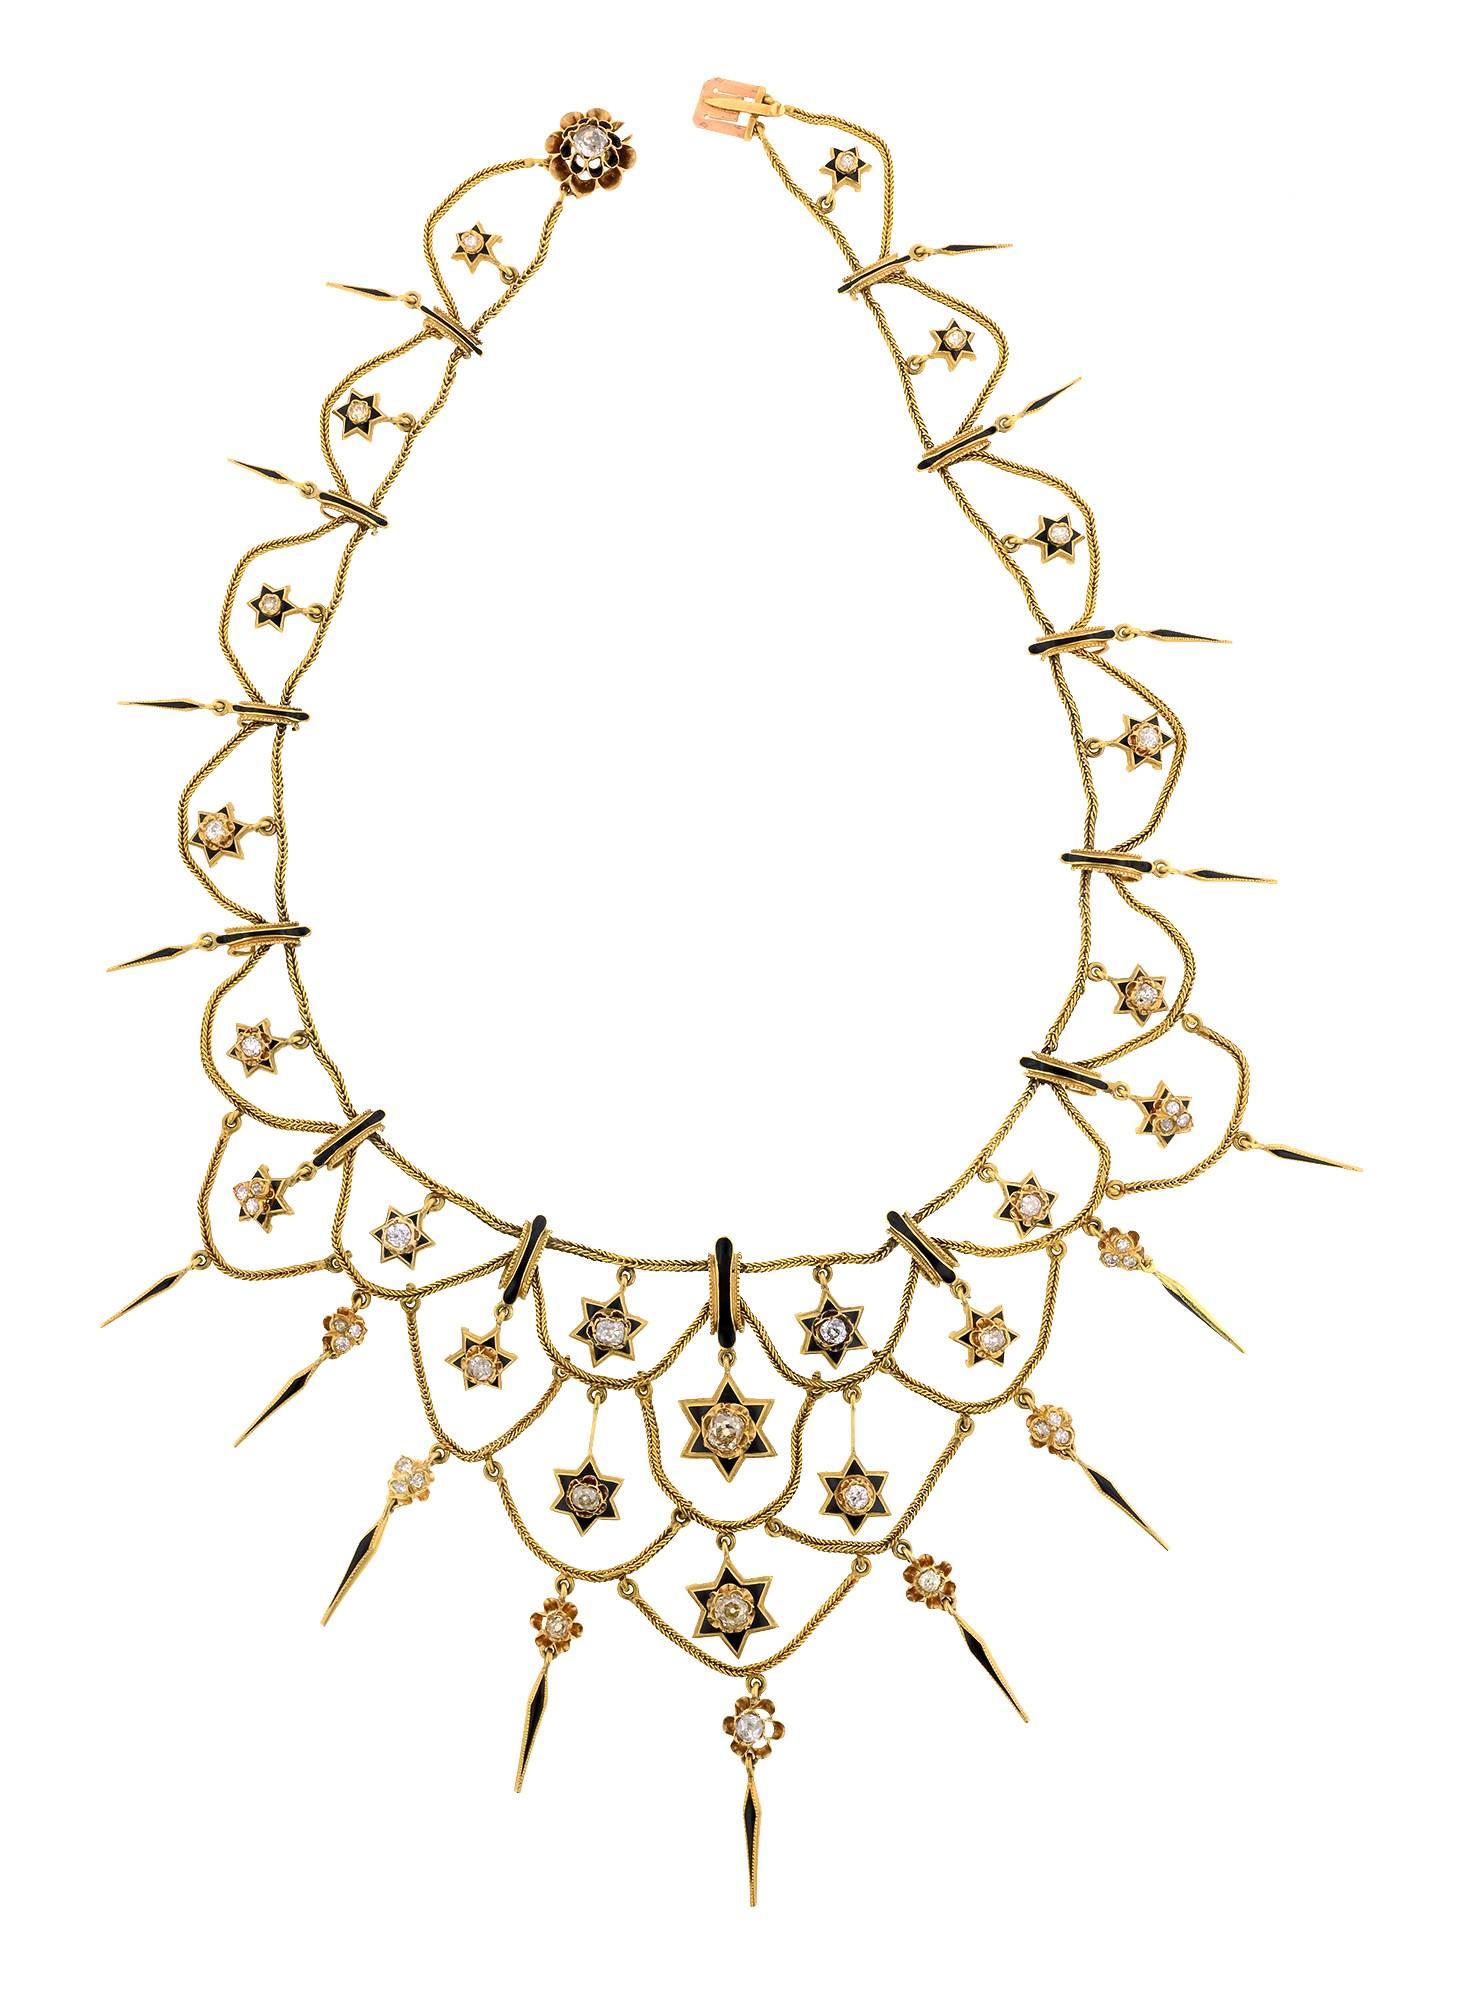 Antique diamond festoon  necklace set with 29 diamonds of various cuts all weighing app 4.04ctw, embellished with black enamel in a festoon style necklace with star and fringe details, fashioned in 18k. French. Circa 1870. Length 16 inches.